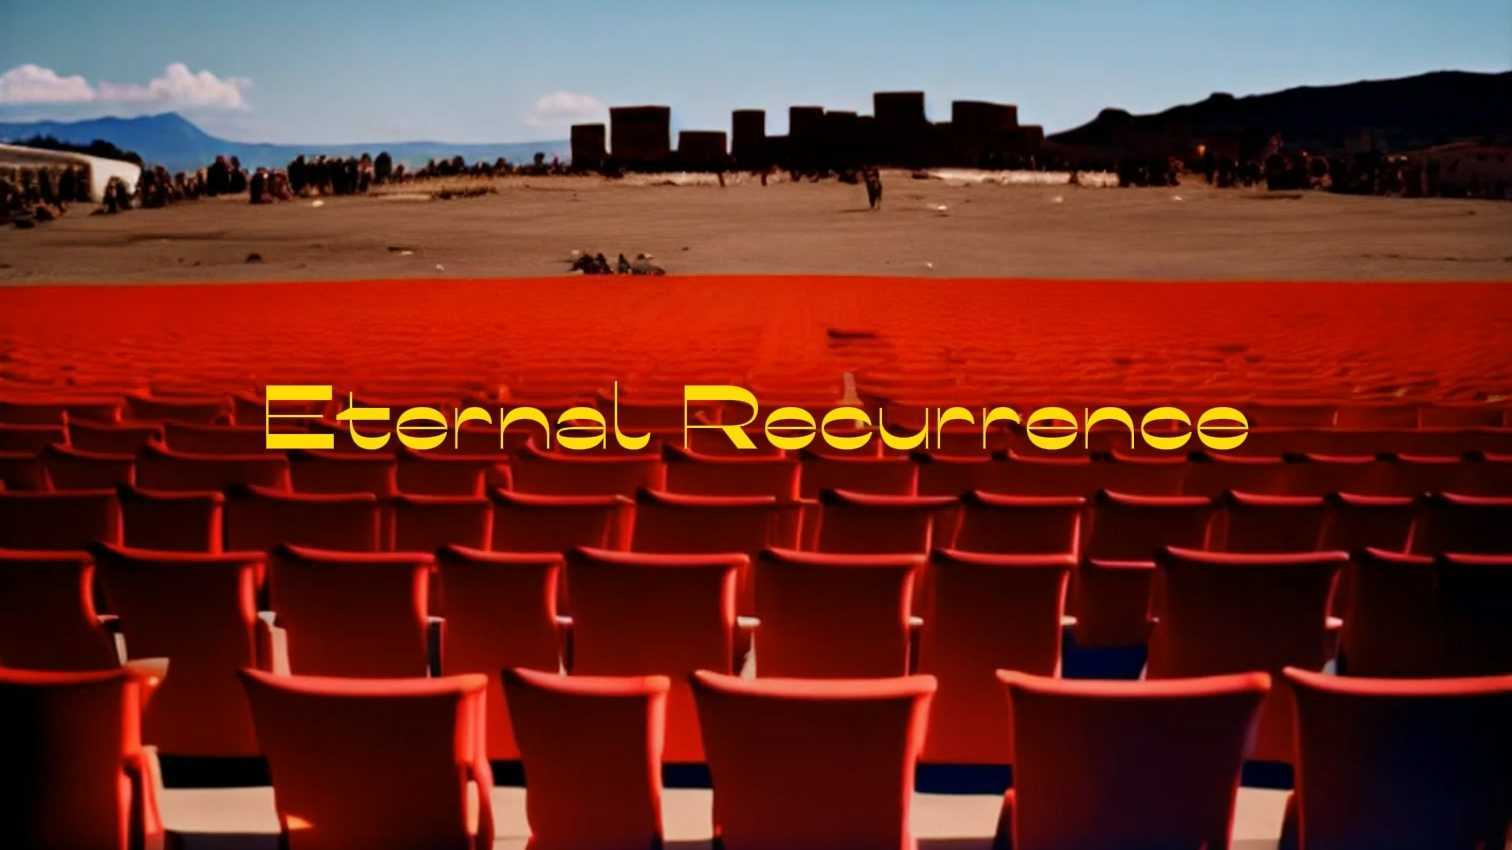 AI 短片 Eternal Recurrence